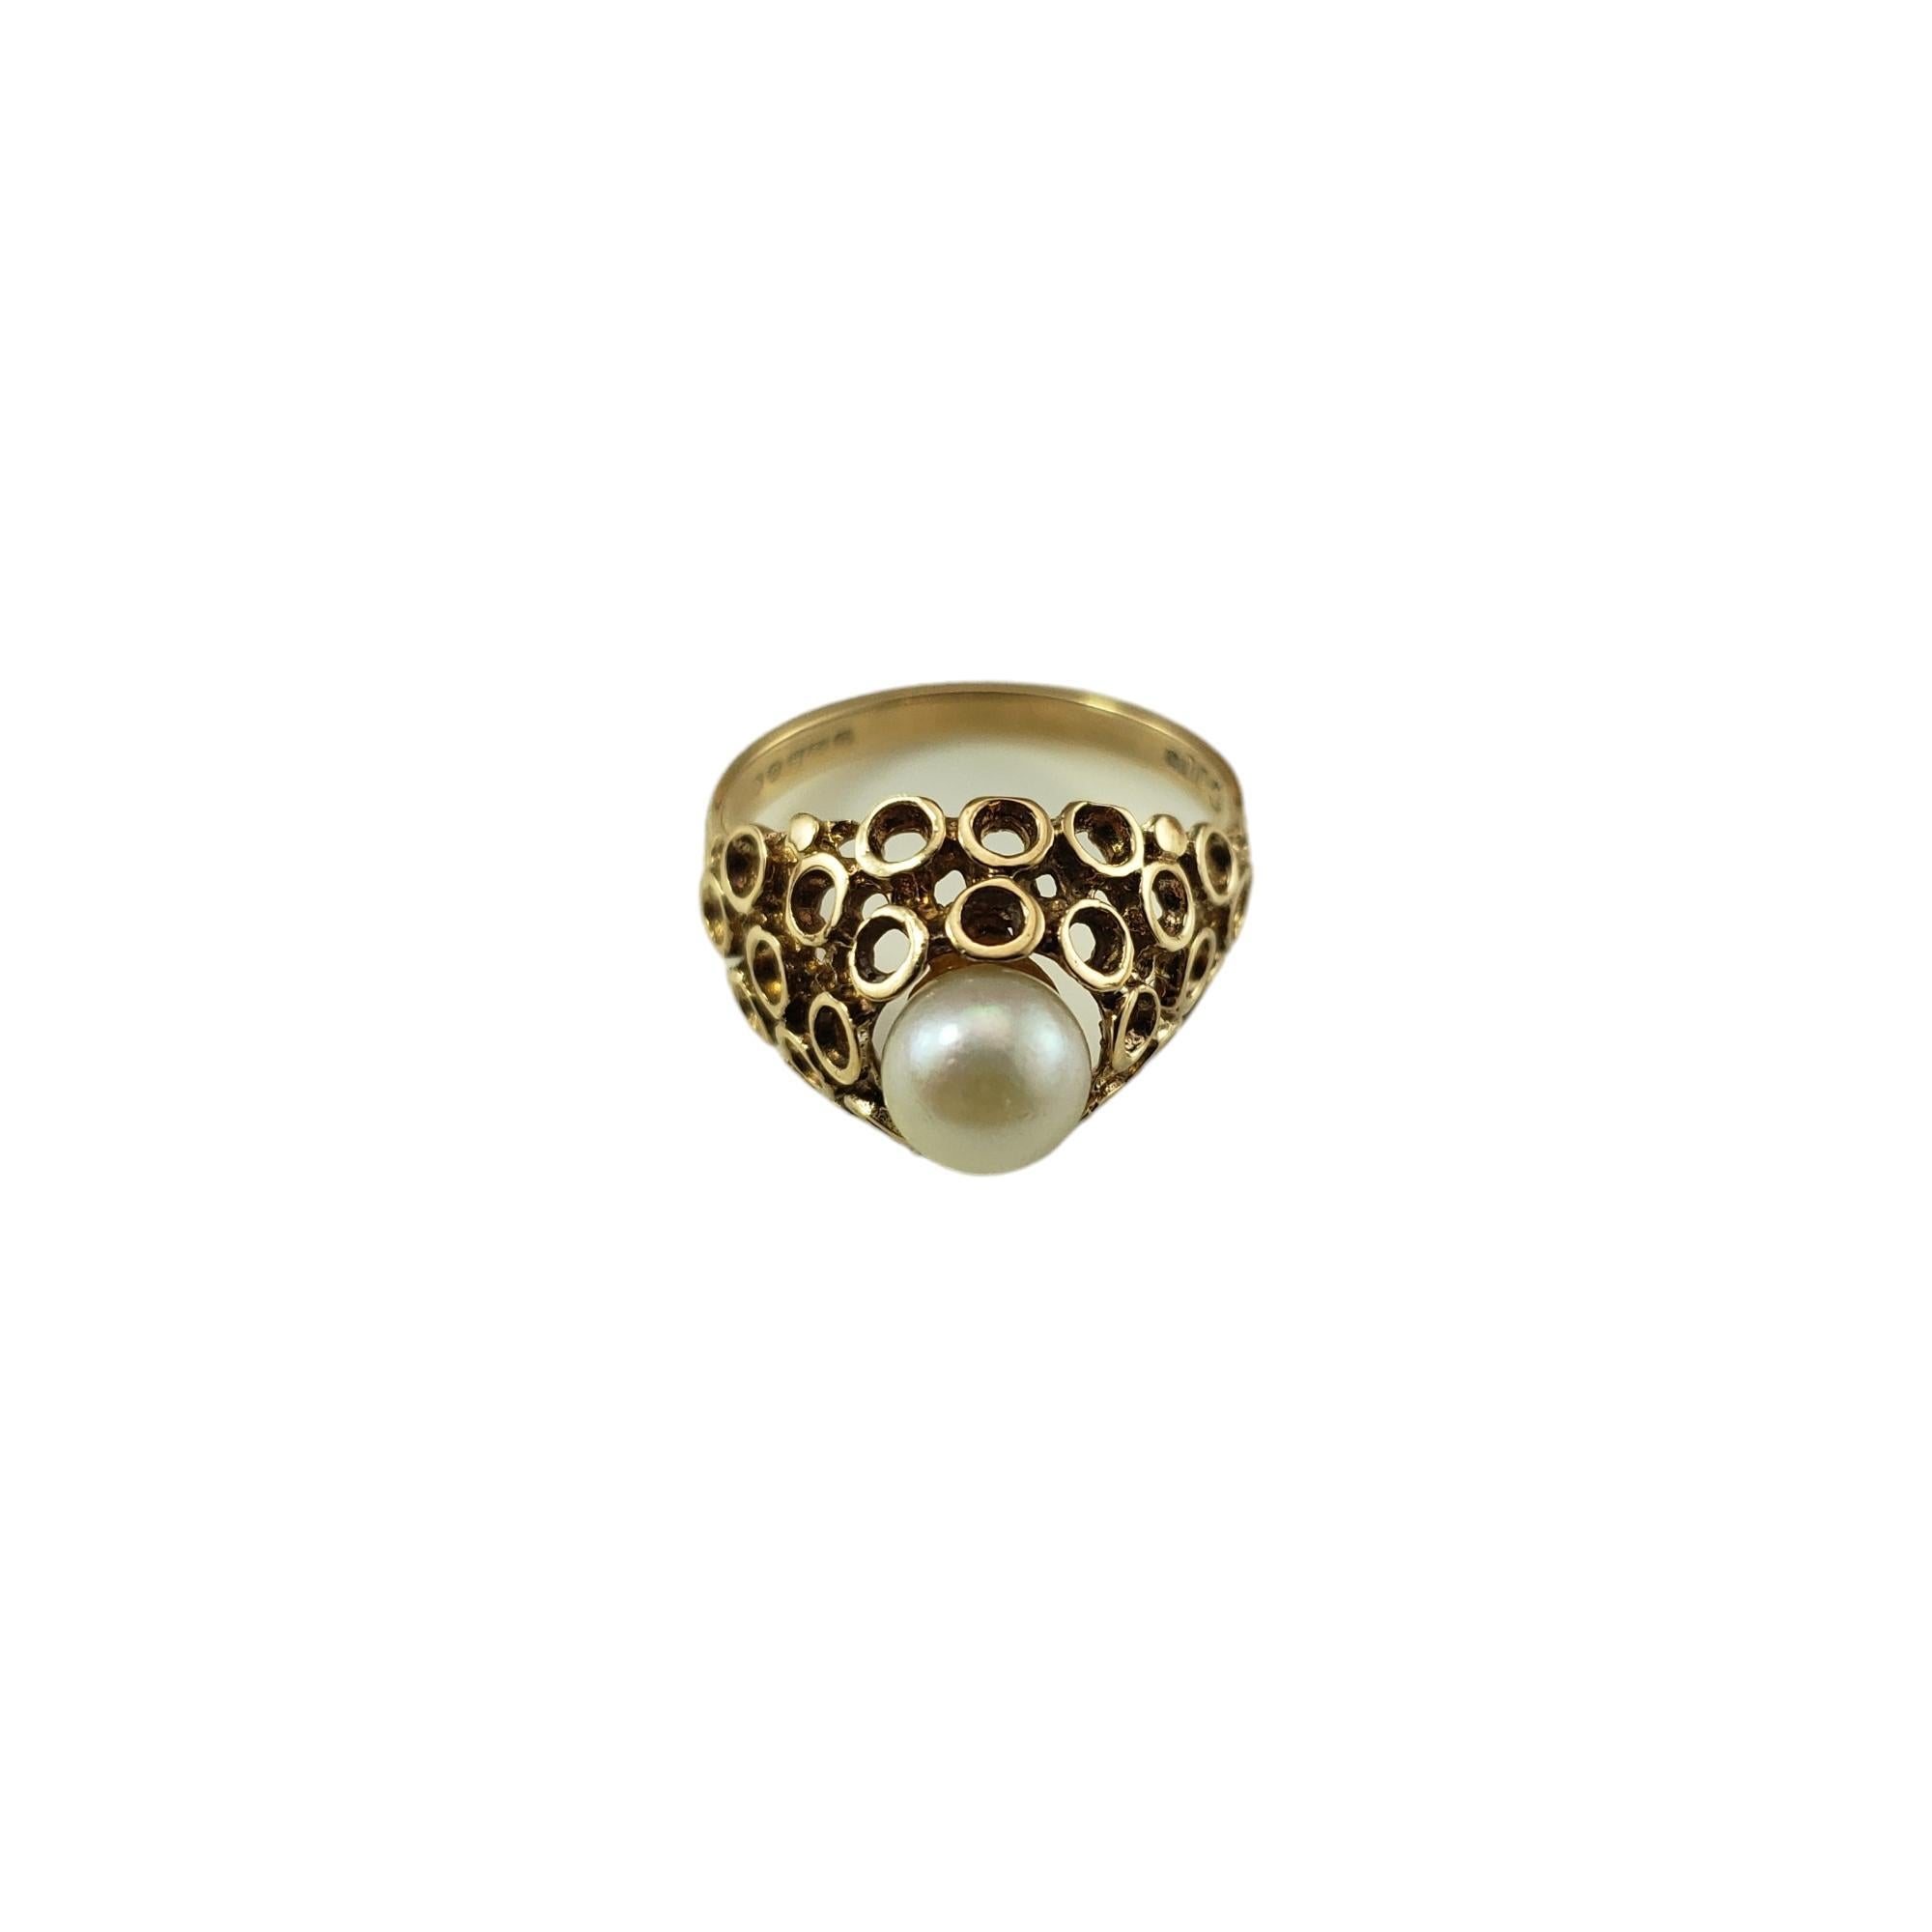 Vintage 9K Yellow Gold Pearl Ring Size 6-

This lovely ring features one round white pearl (6 mm) set in beautifully detailed 9K yellow gold.  Width: 12 mm.
Shank: 2 mm.

Ring Size: 6

Stamped: 9  375  

Weight: 1.6 dwt./2.5 gr.

Very good